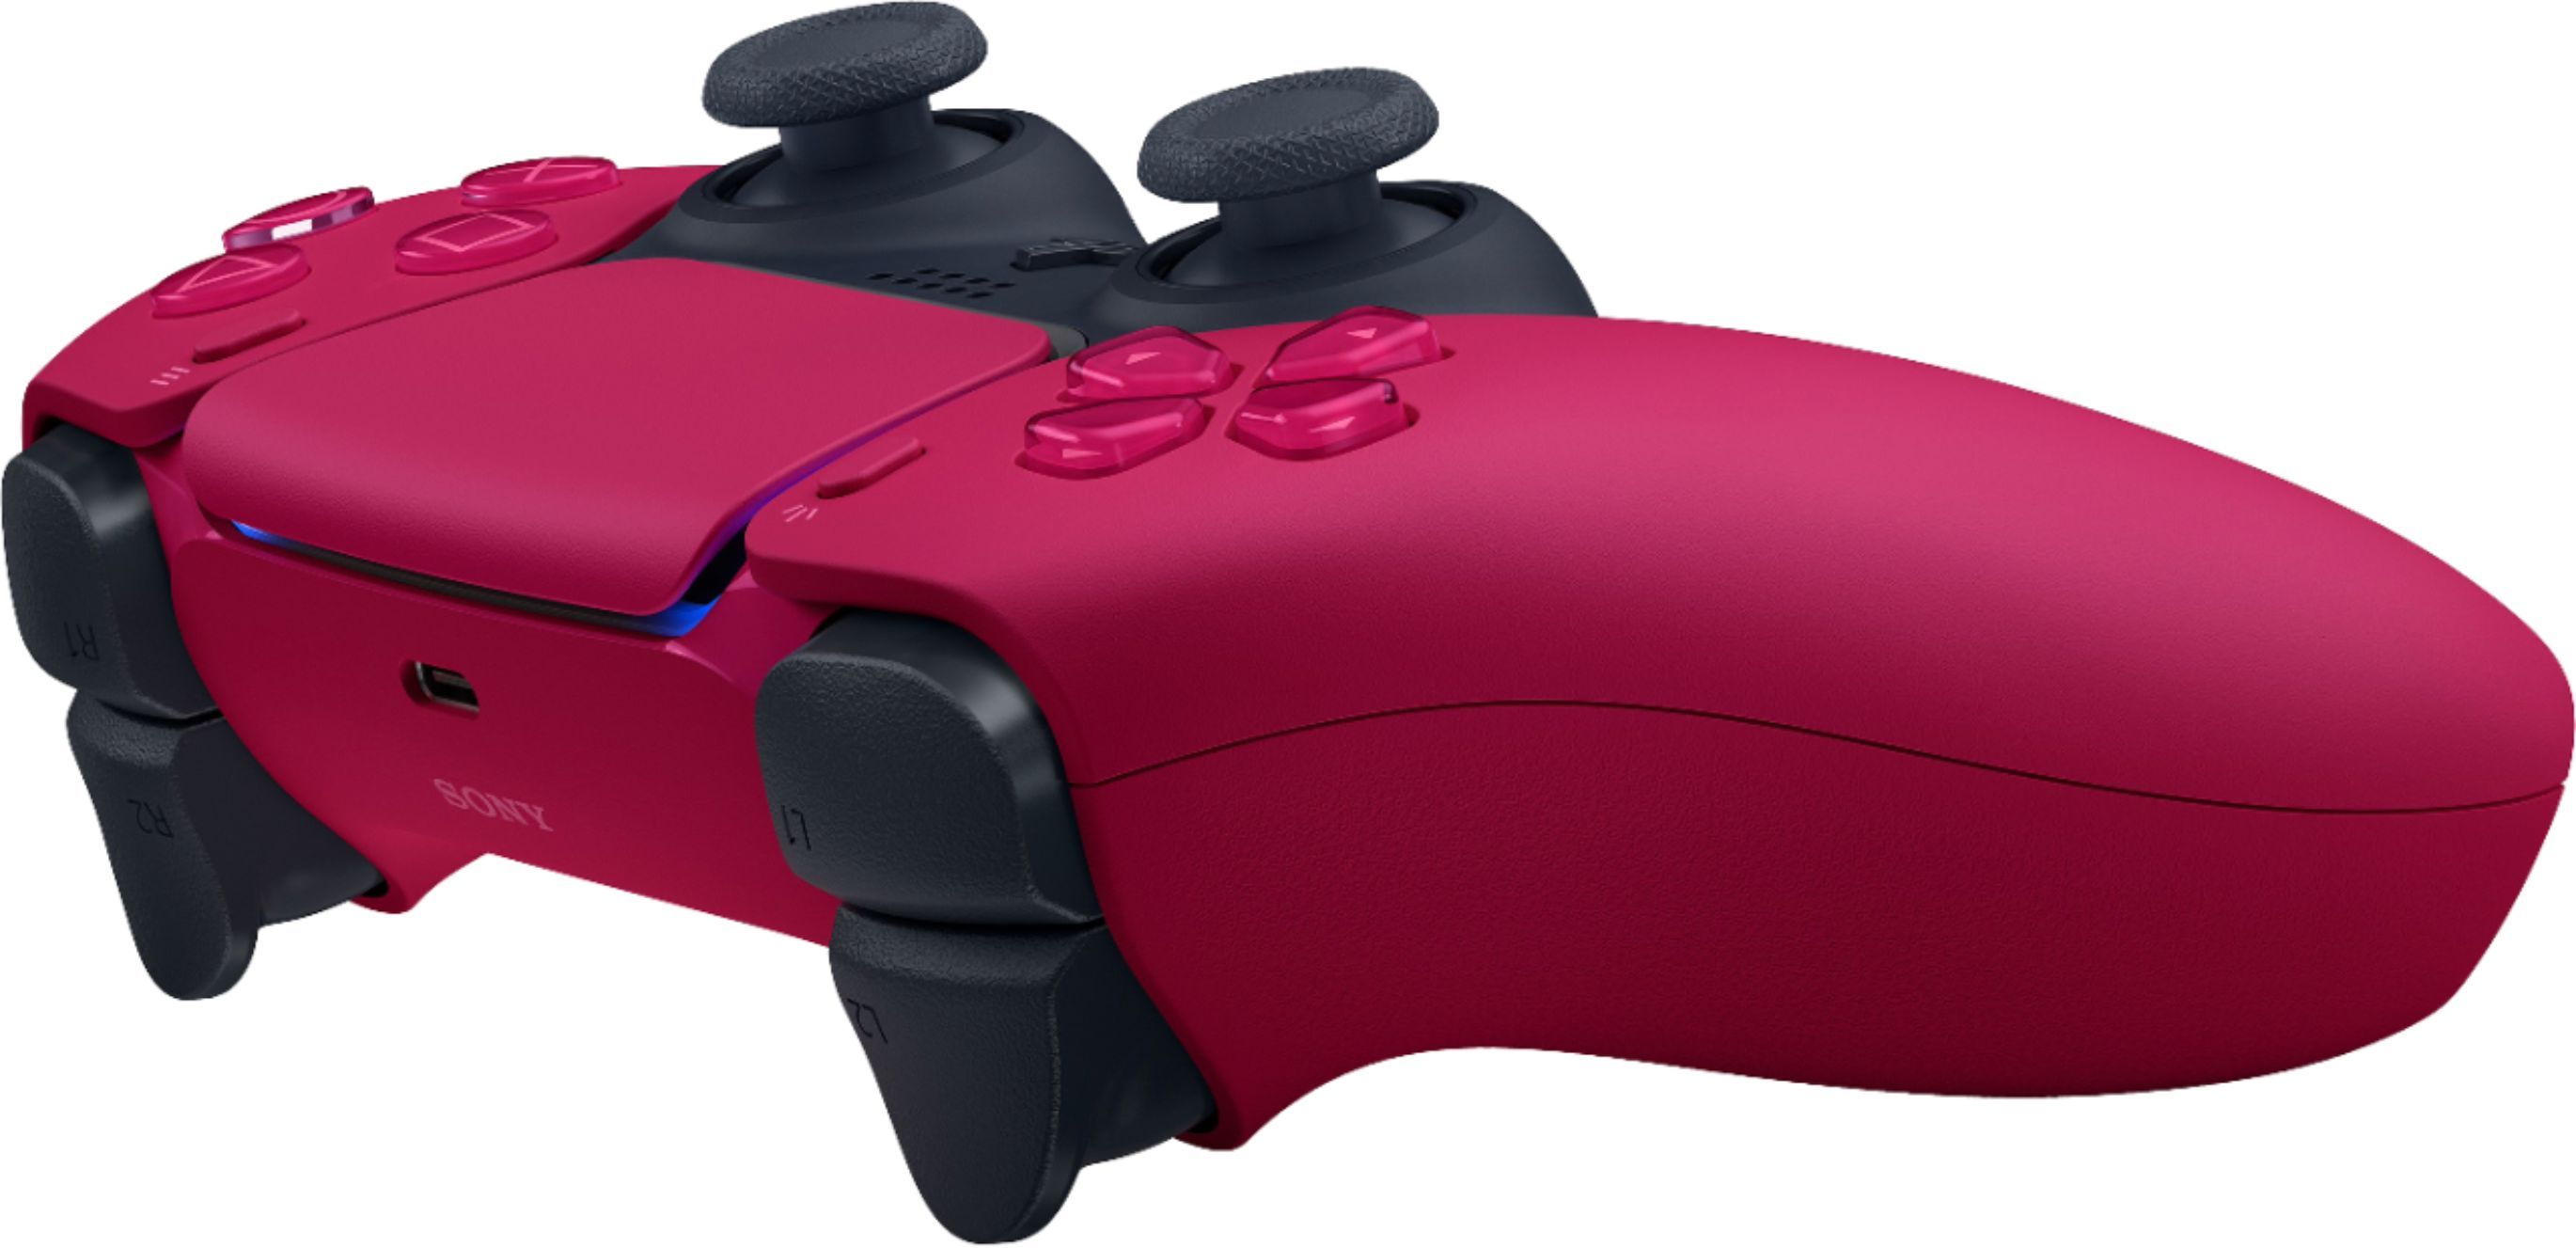 PS5 DualSense wireless controller - Cosmic Red - CFIZCT1WCOSMICRED    